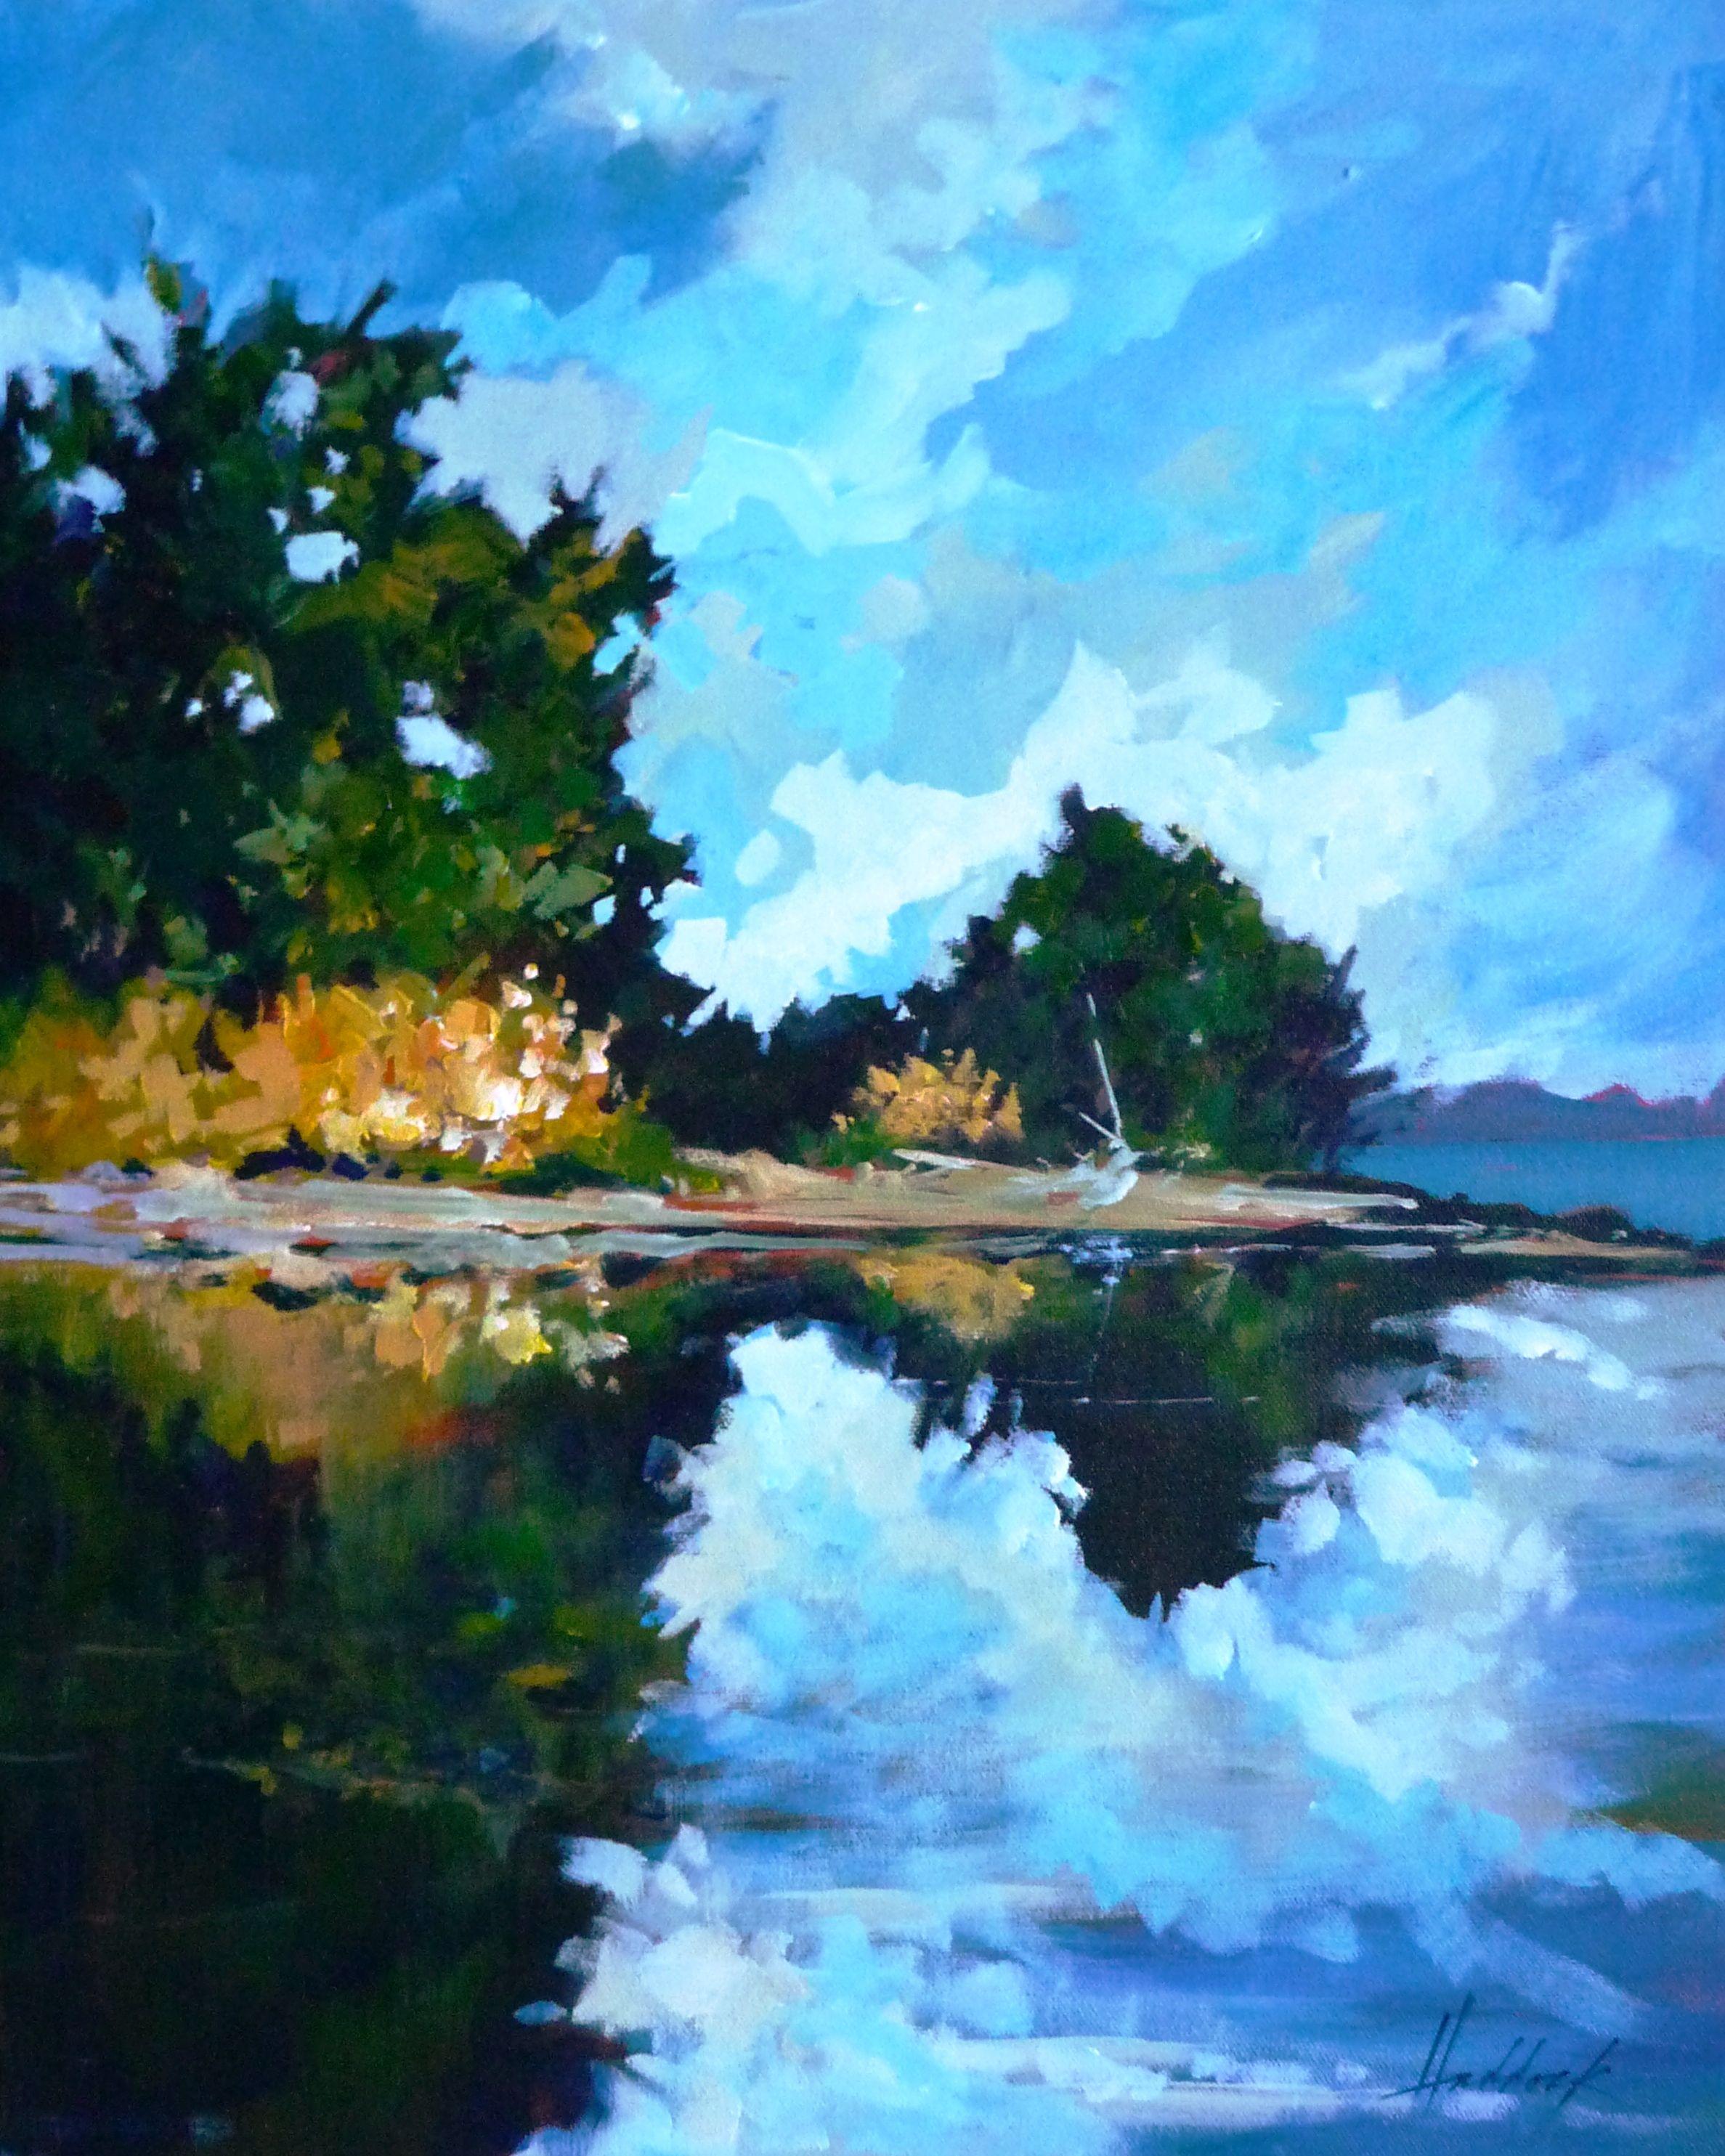 Calm waters of a placid seaside lagoon reflect the summer skies and colorful trees and foliage.  :: Painting :: Impressionist :: This piece comes with an official certificate of authenticity signed by the artist :: Ready to Hang: Yes :: Signed: Yes